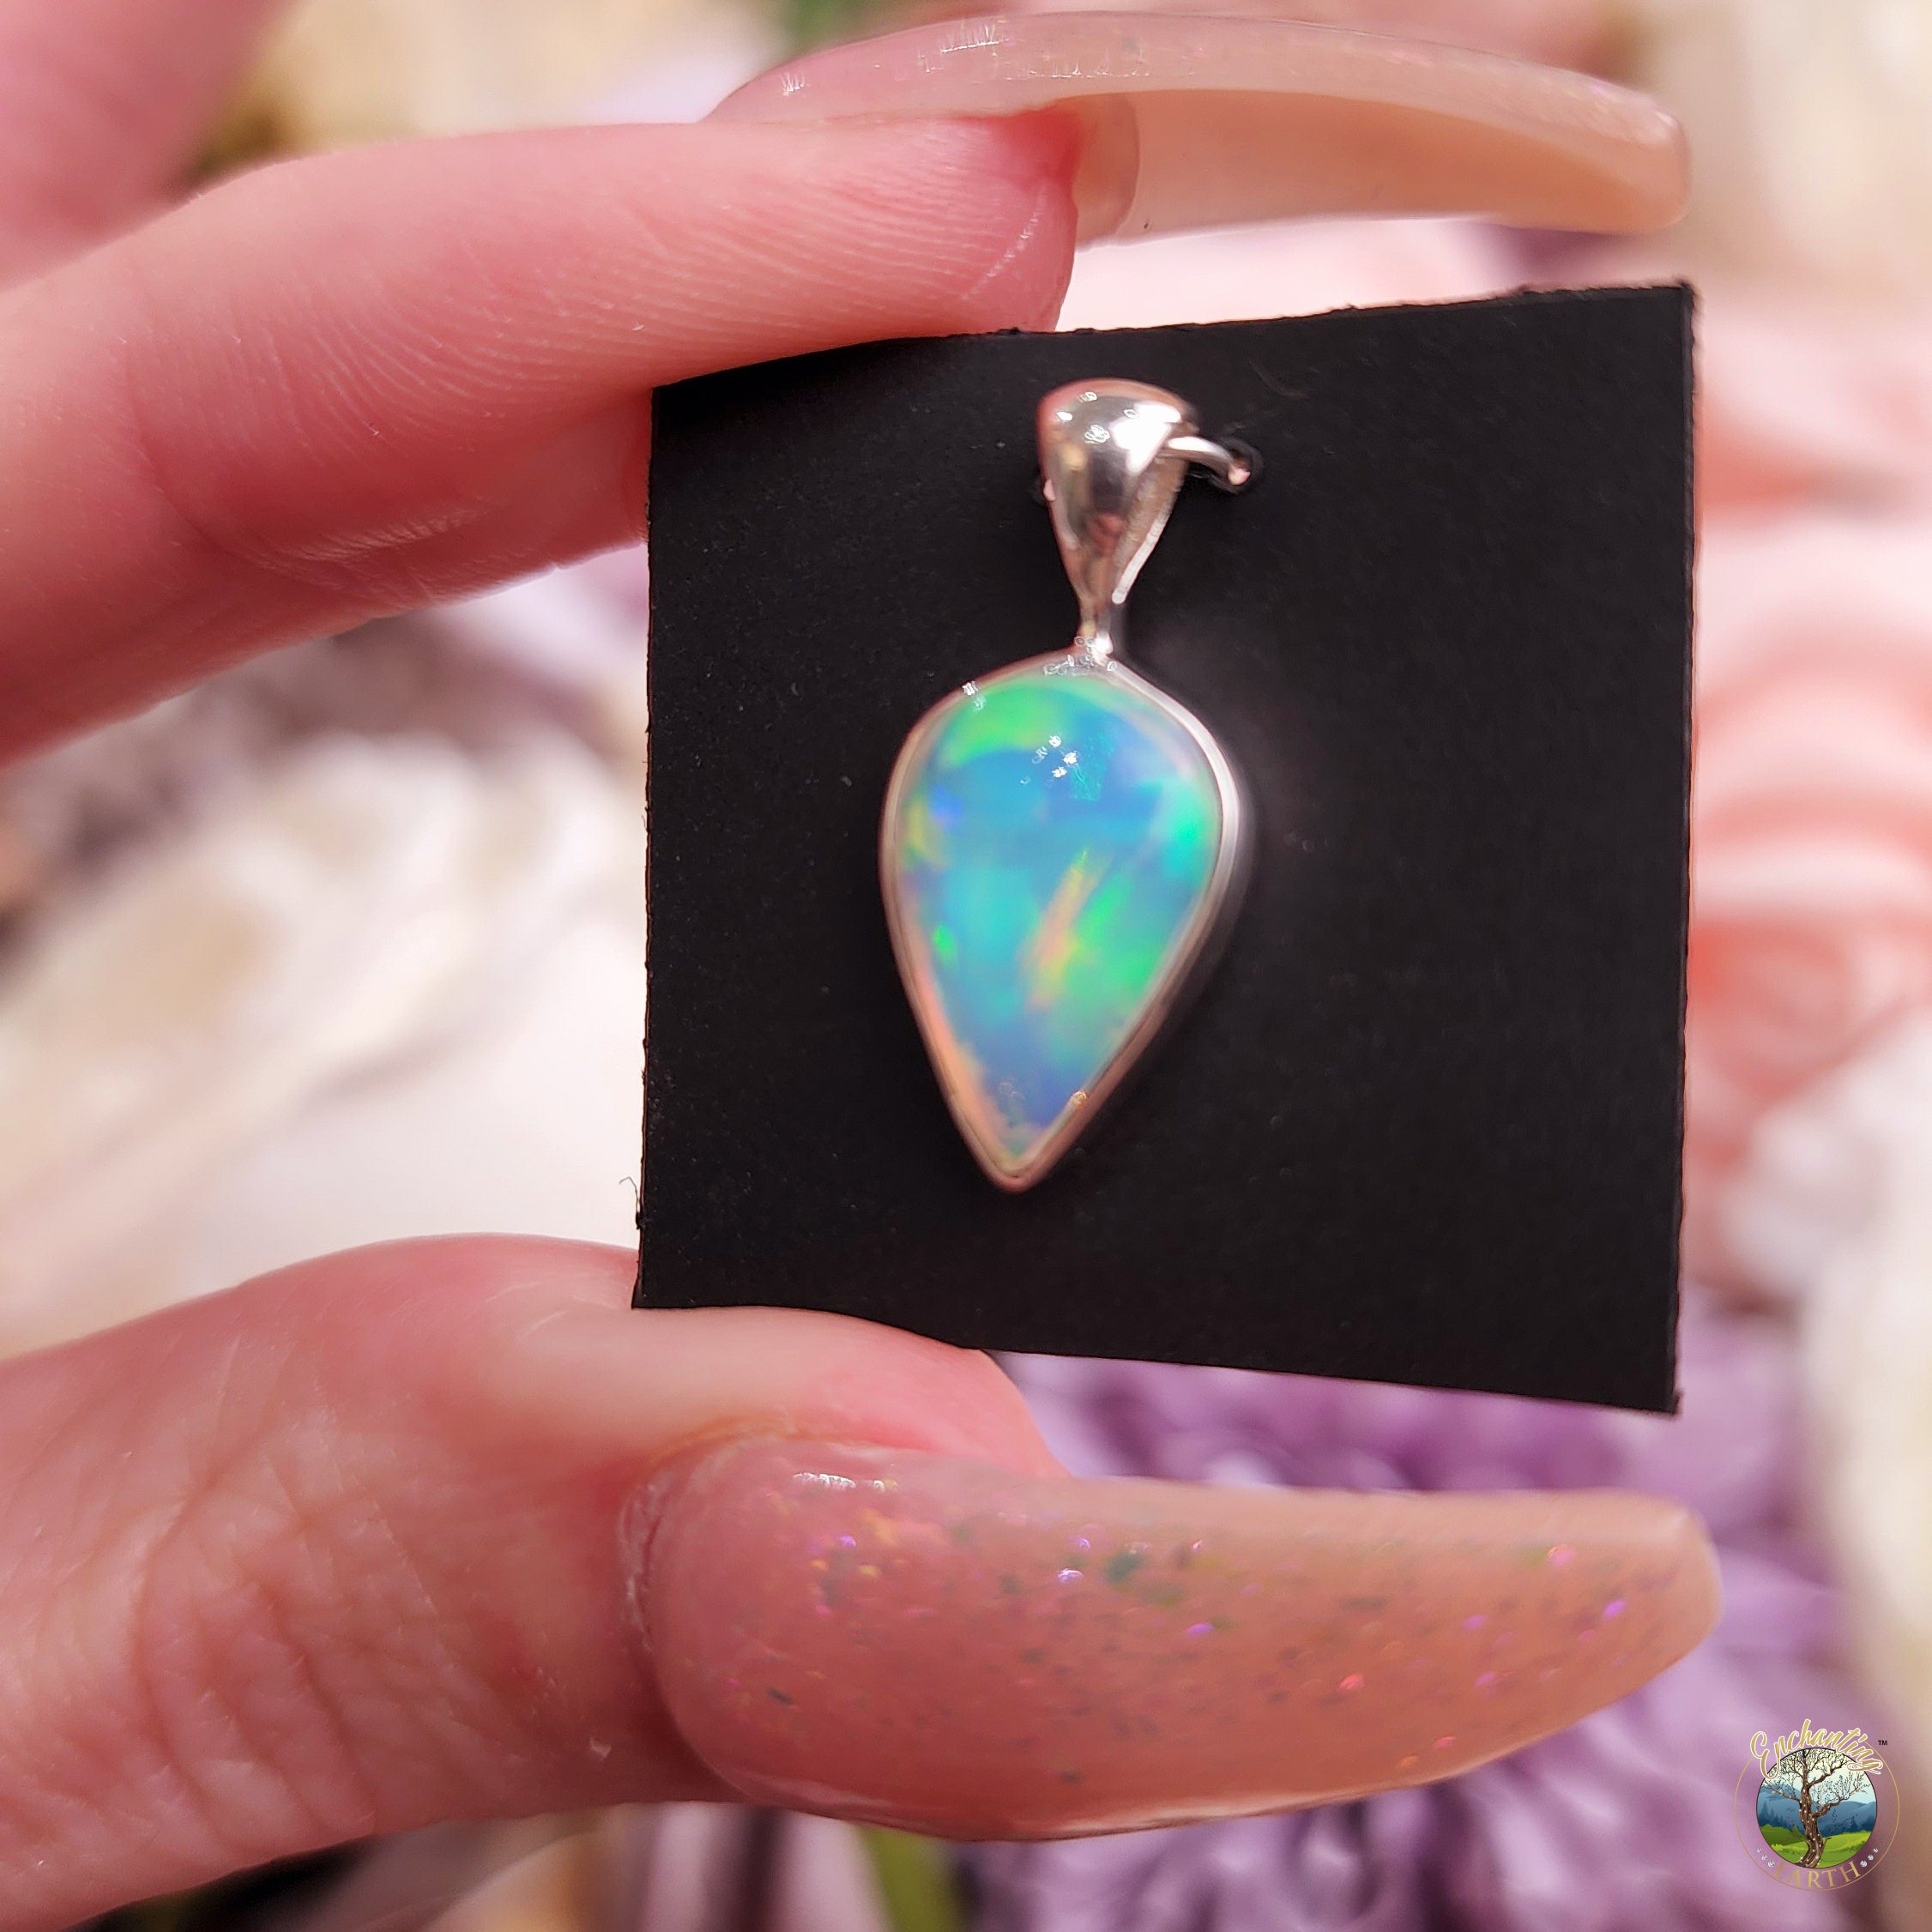 Ethiopian Opal .925 Silver Pendant (111C) for Creativity, Joy and Self Discovery